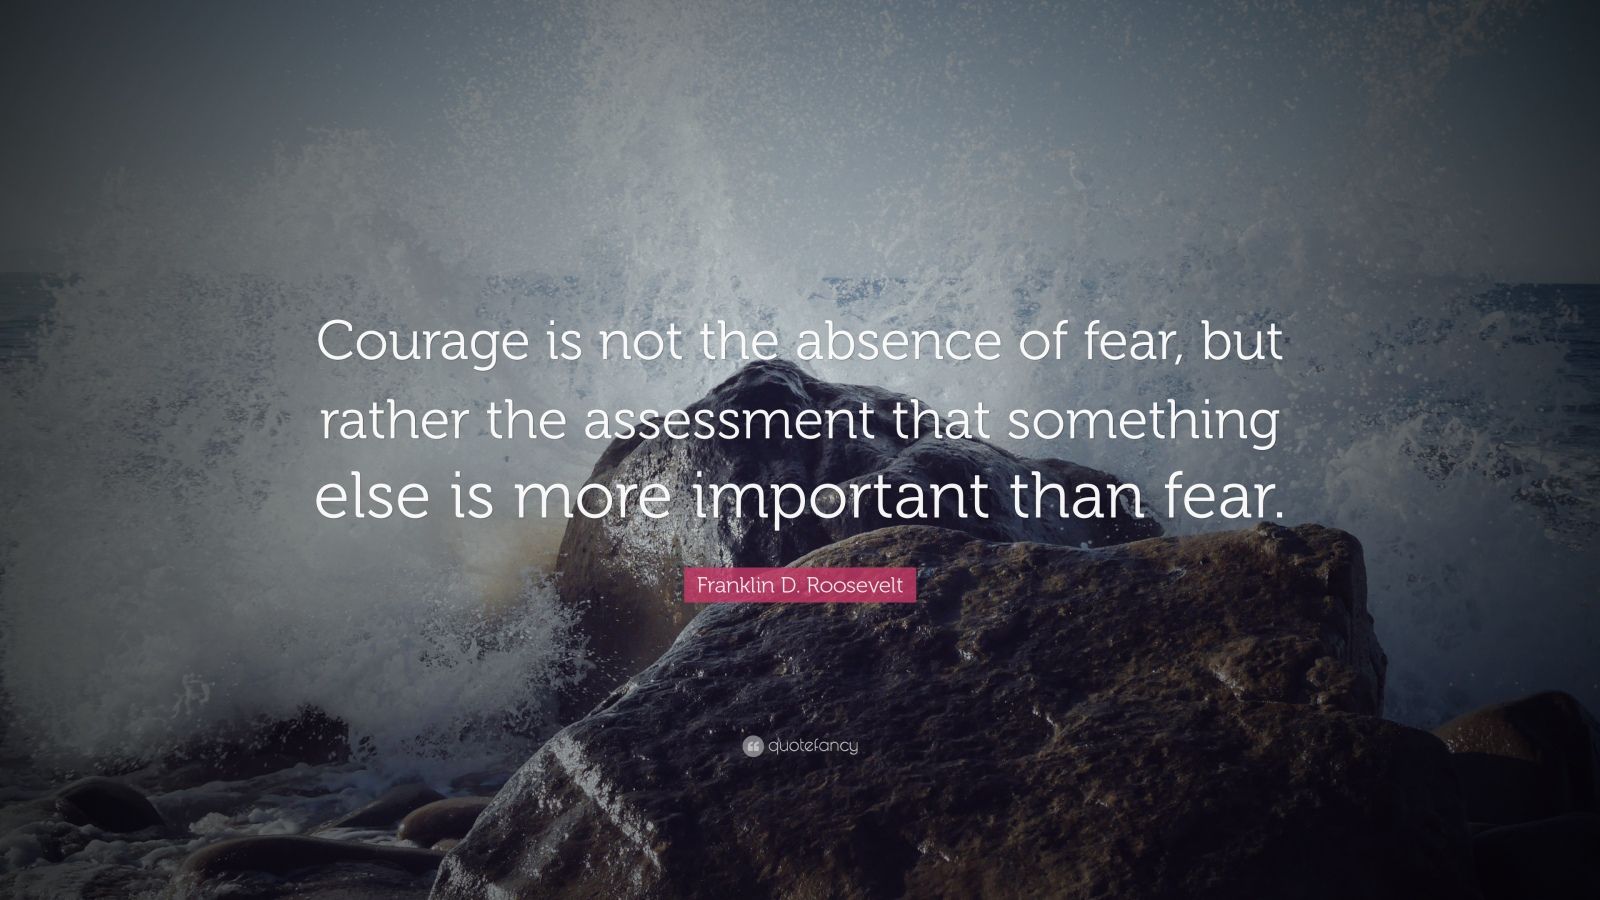 Franklin D. Roosevelt Quote: “Courage is not the absence of fear, but ...